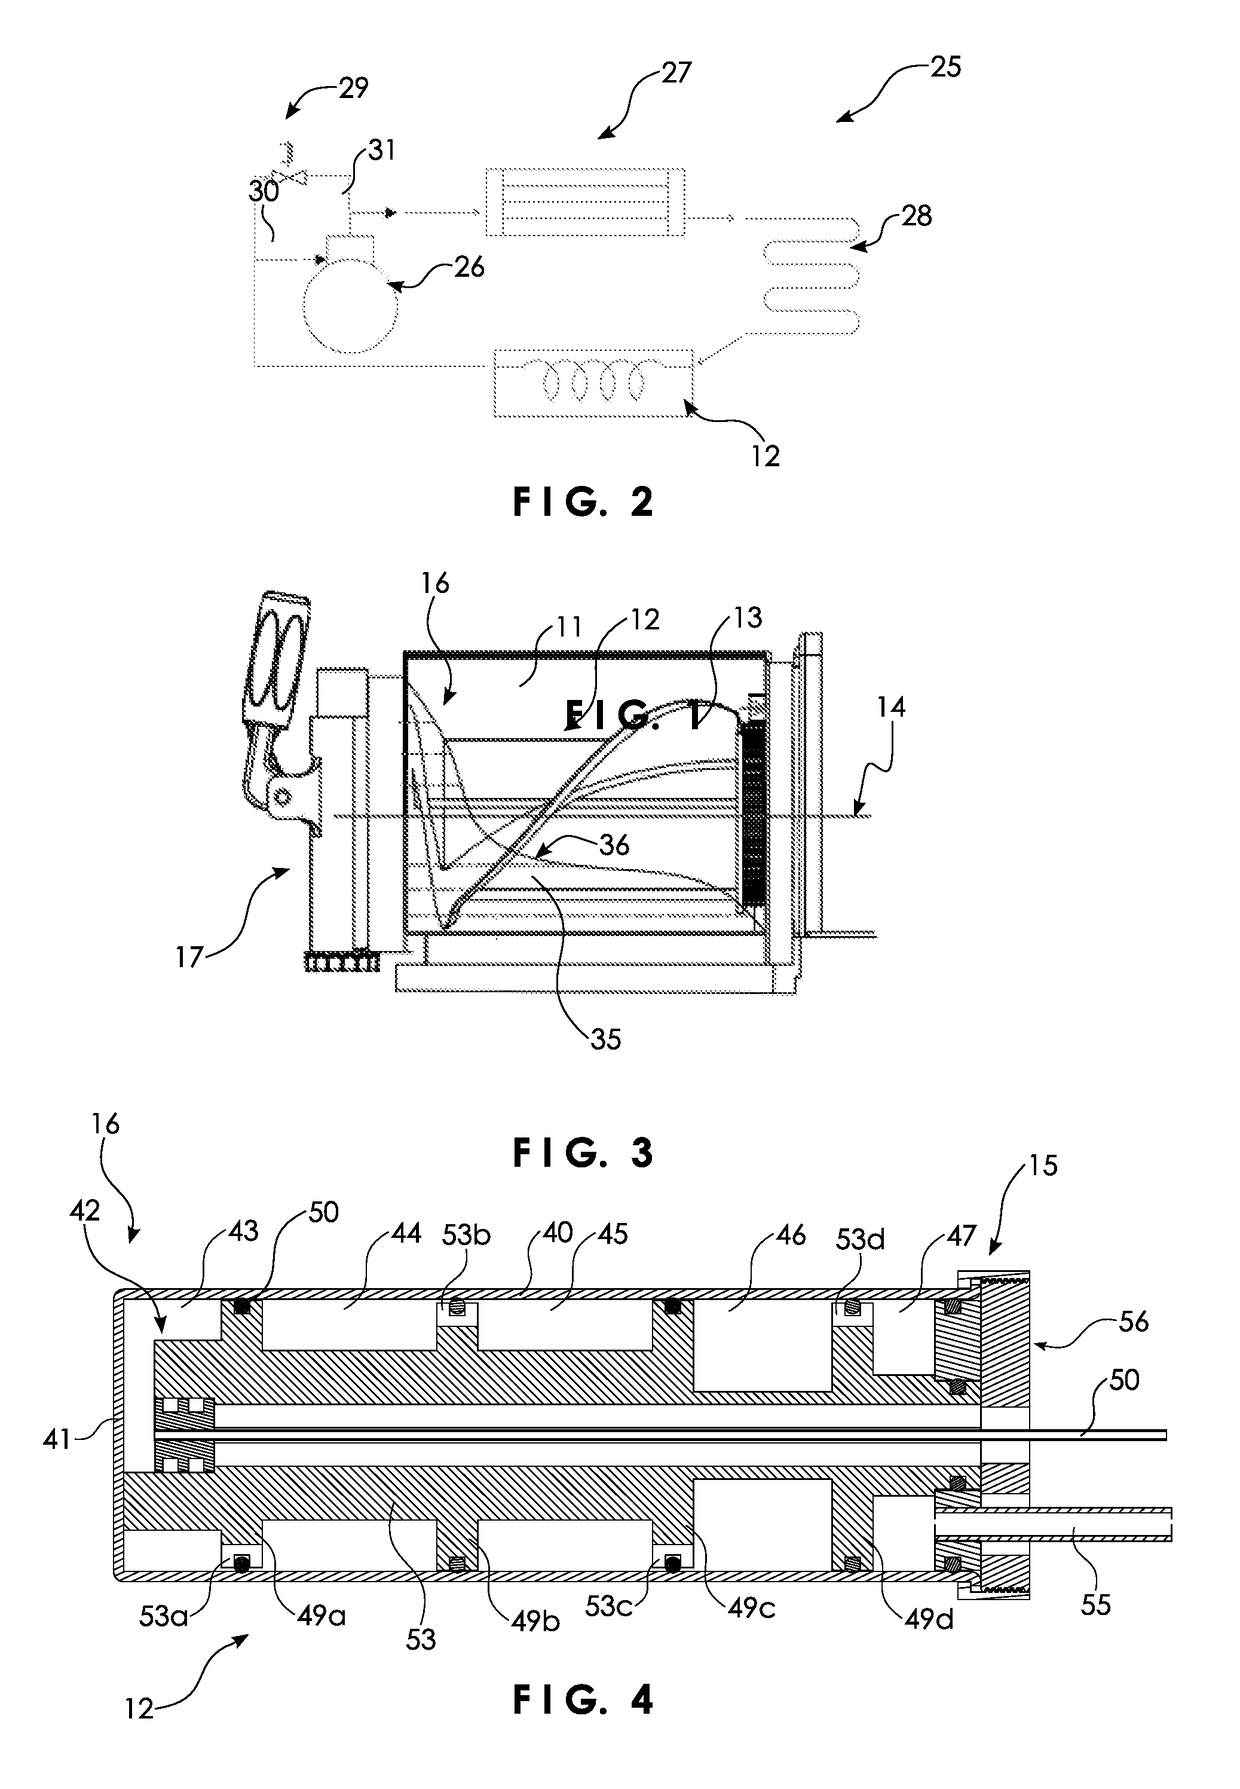 Auger-type appliance for making frozen food products